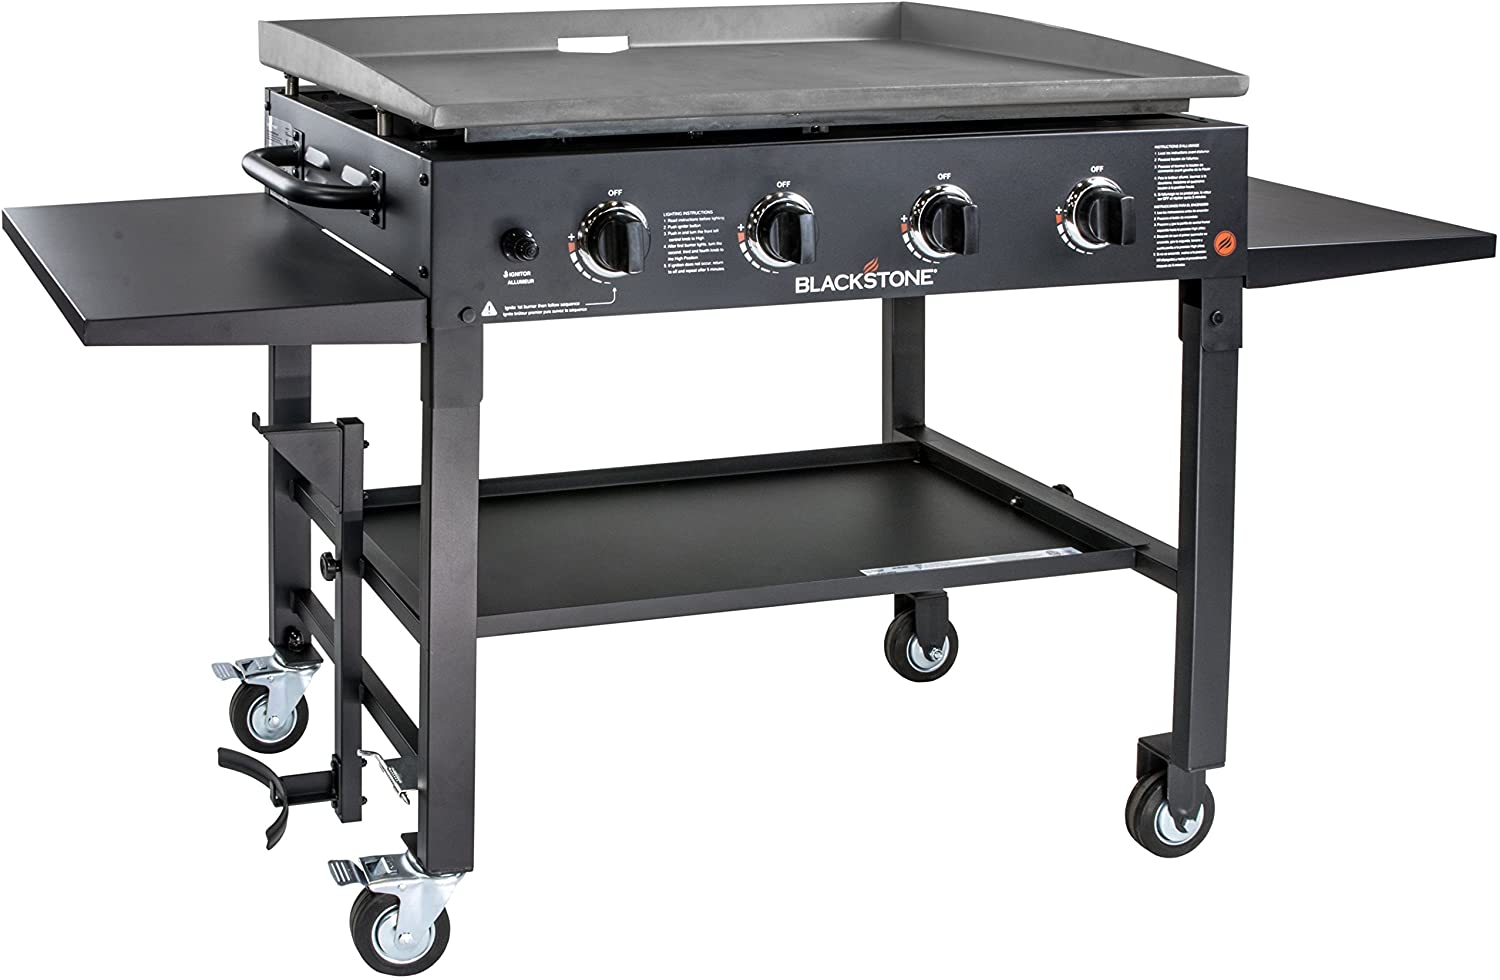  2. 1554 Outdoor Flat Top Gas Grill and Blackstone Griddles 